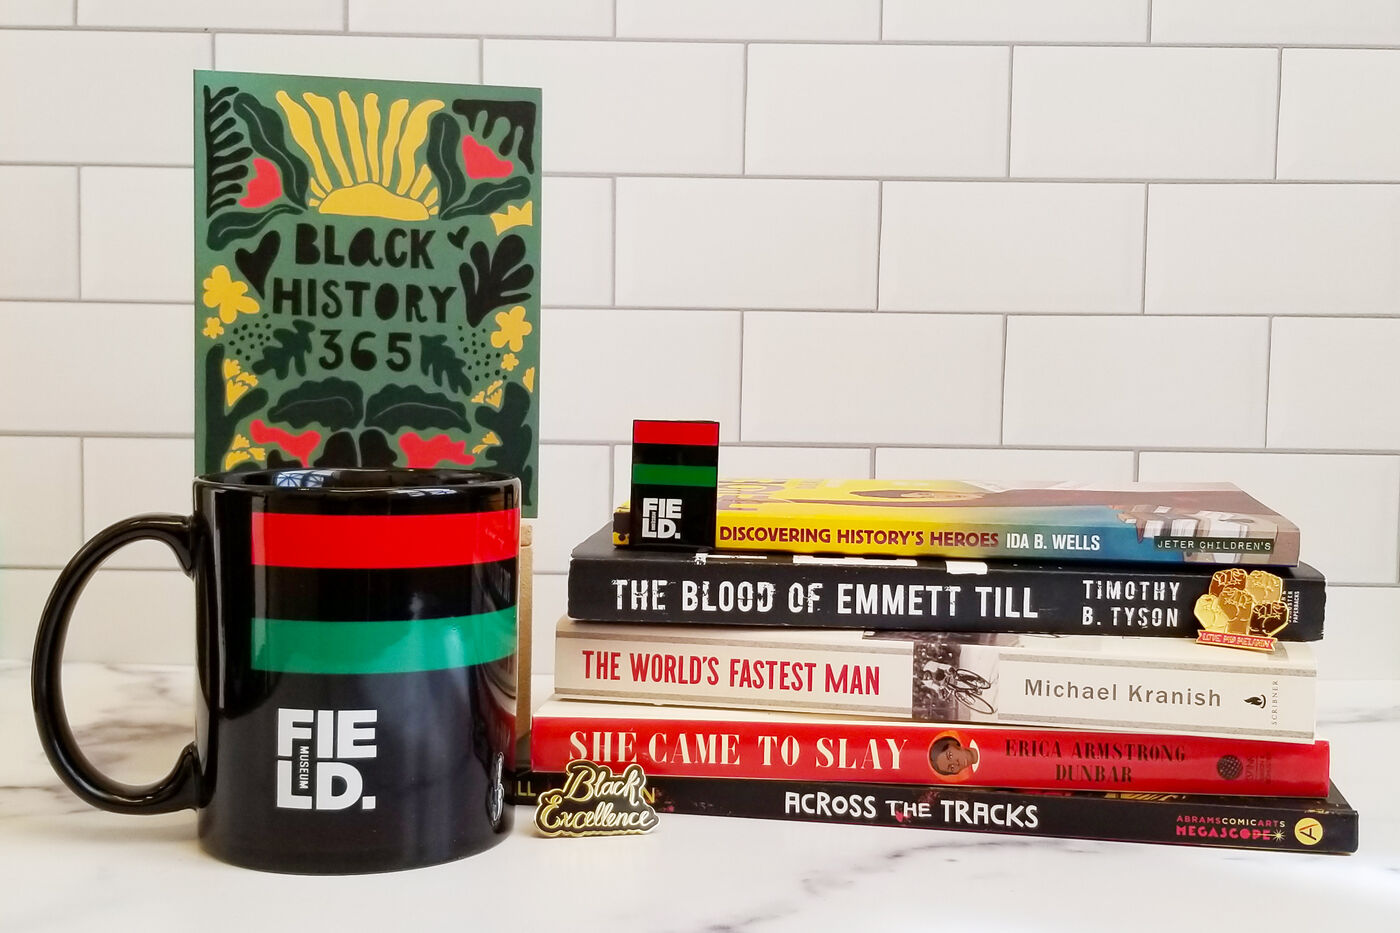 A selection of items available for purchase at the museum store, including a stack of books, a mug, a greeting card and enamel pins.